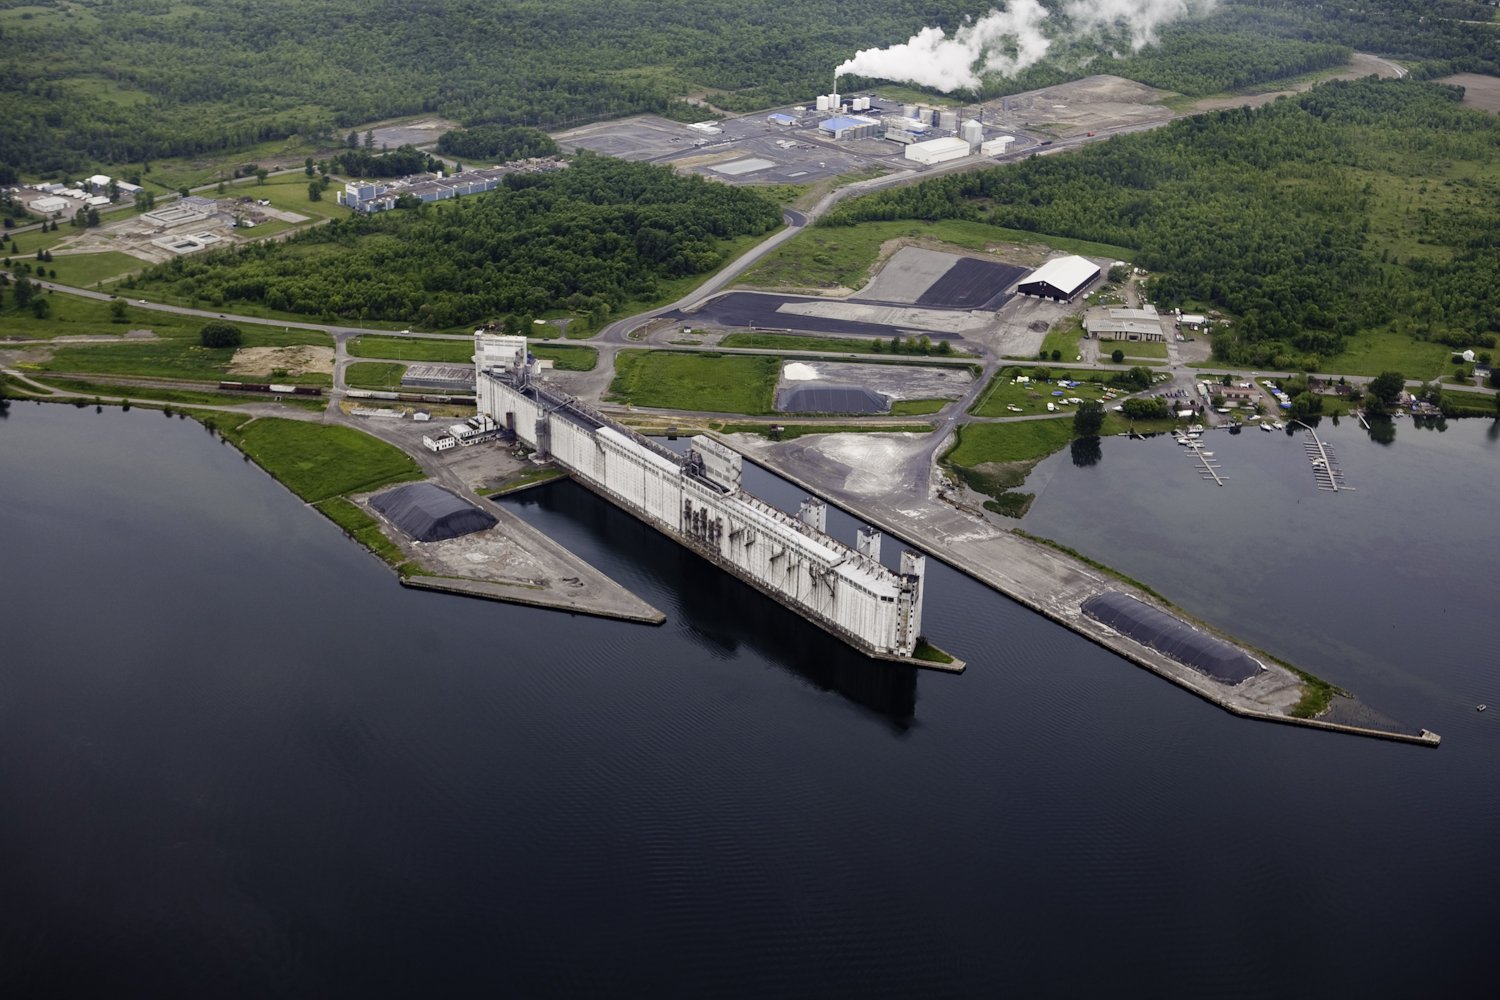 Aerial photo of international port along the St. Lawrence River